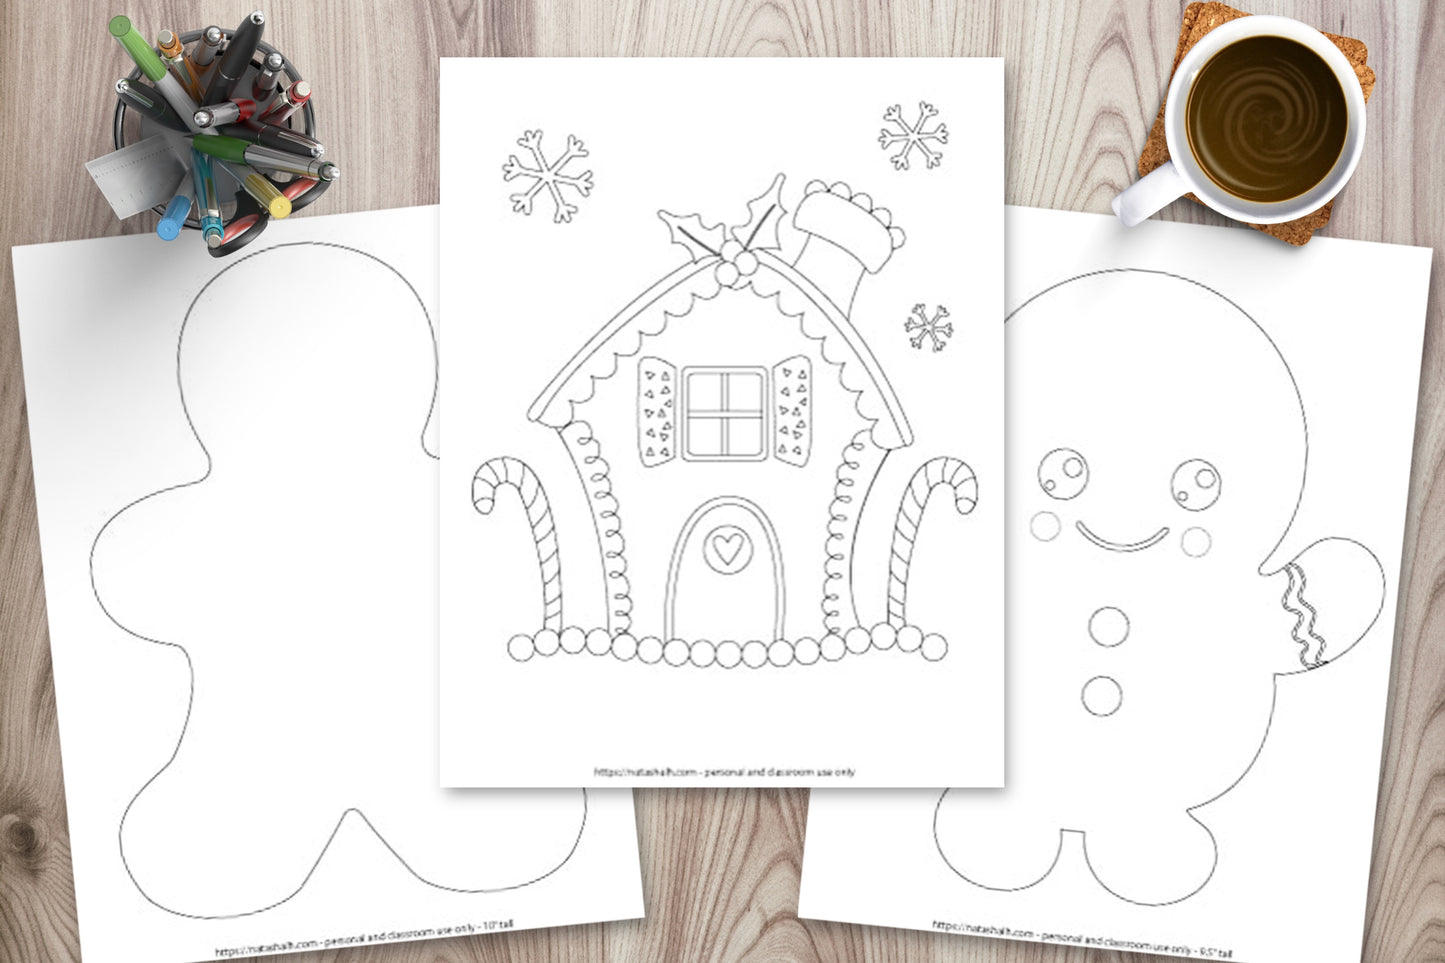 Gingerbread man templates coloring pages â the artisan life